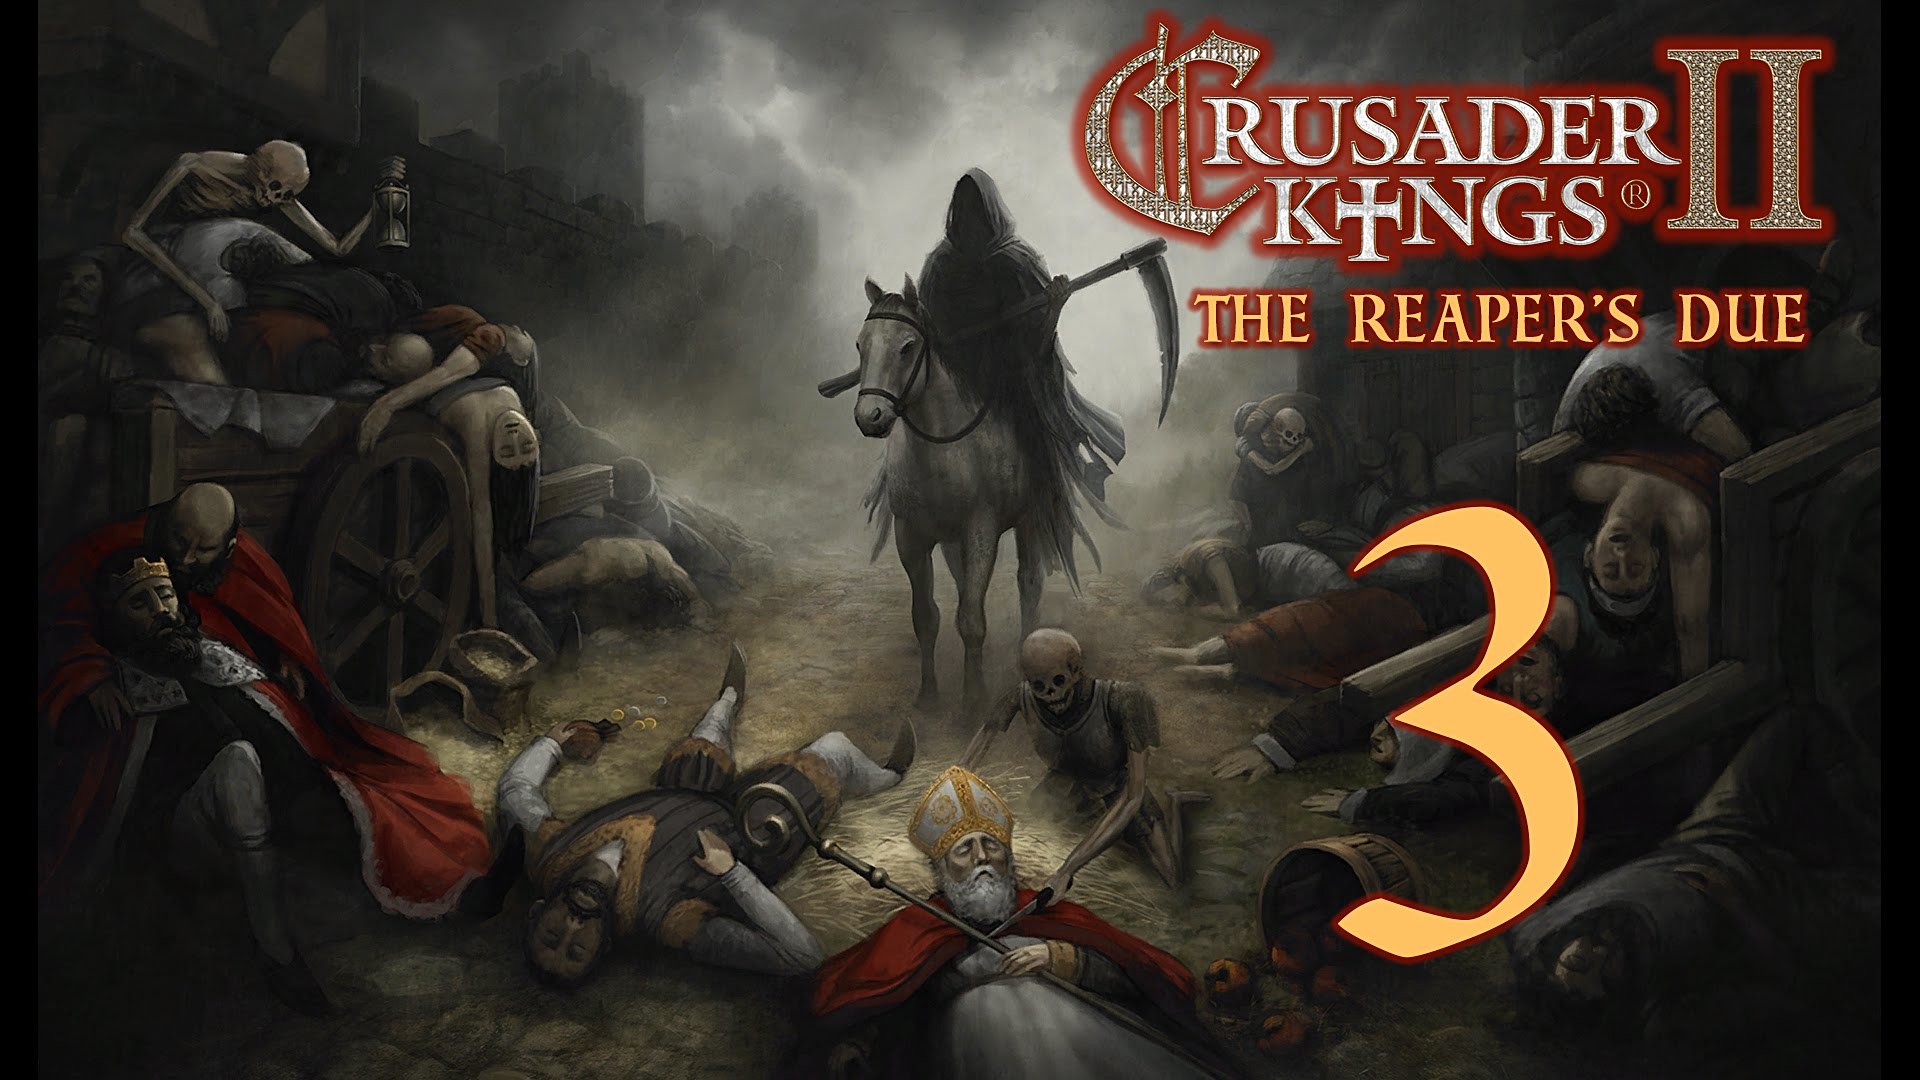 Crusader Kings 2 The Reapers Due – BLACK DEATH Upon England Part 3